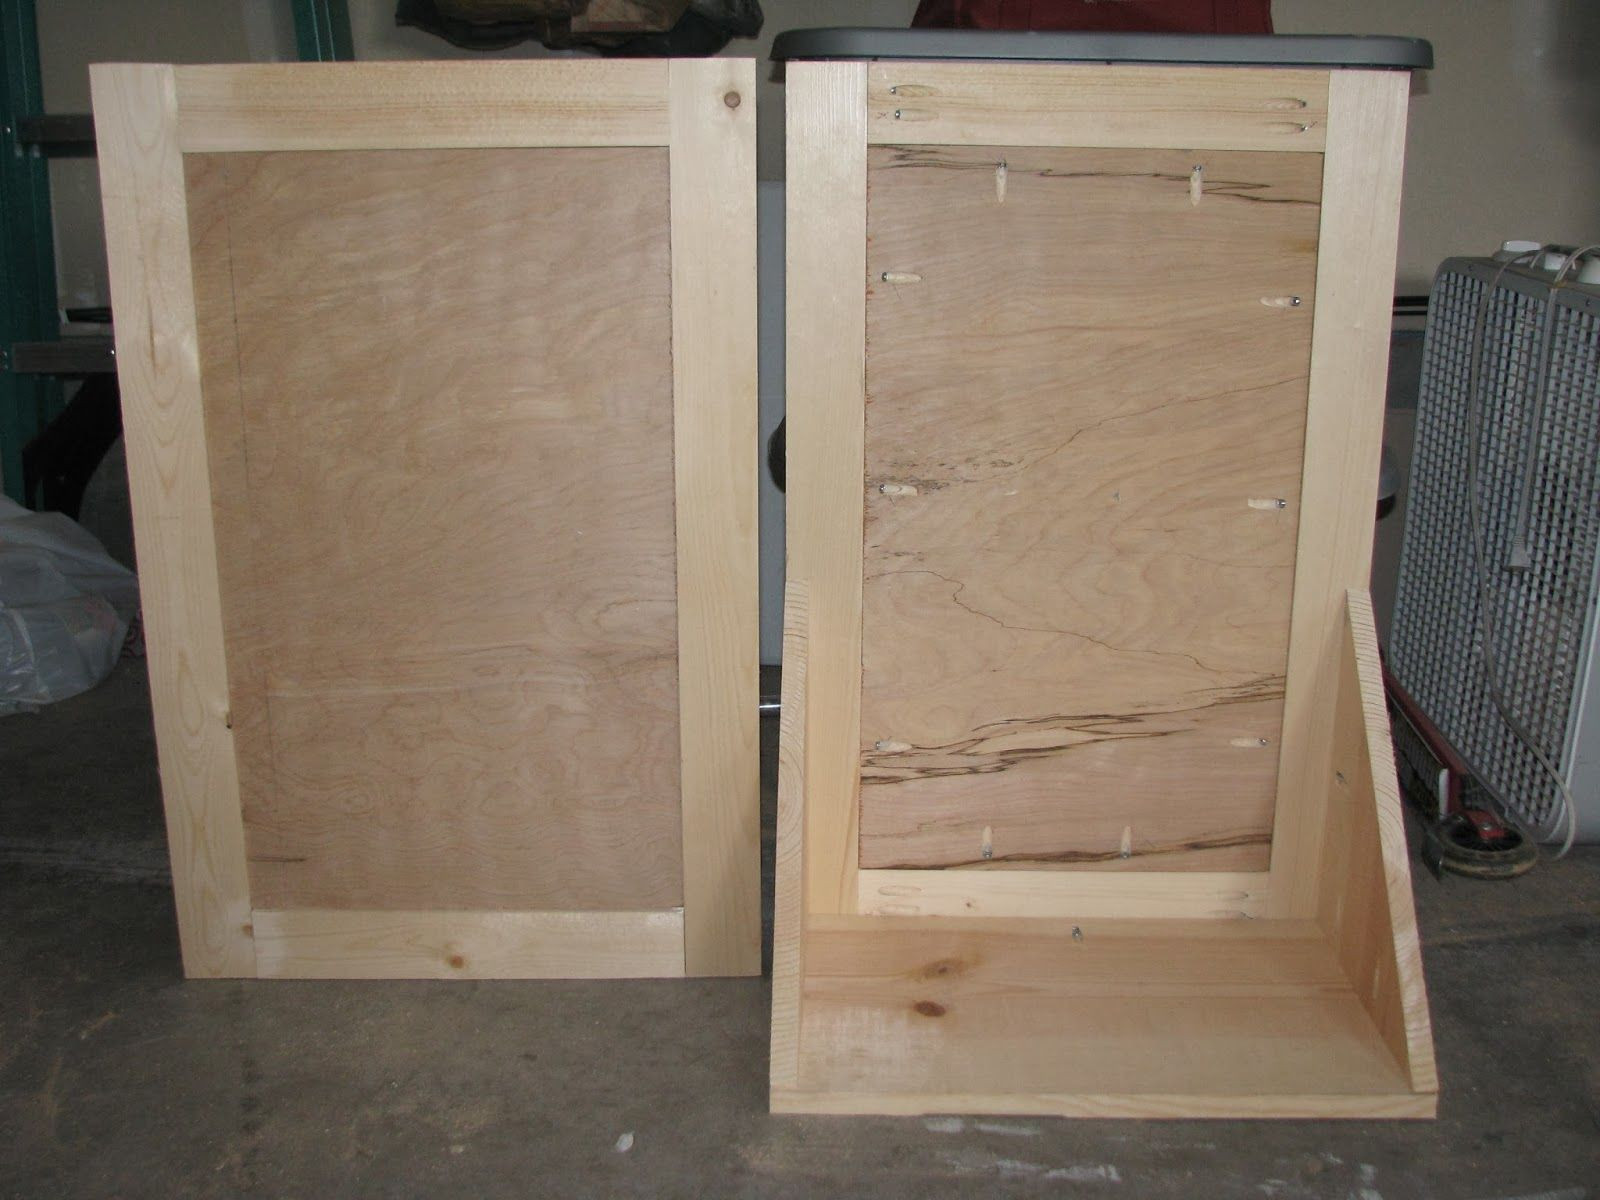 Plywood Cabinet Doors DIY
 Pin by Curbstalker on DIY Projects